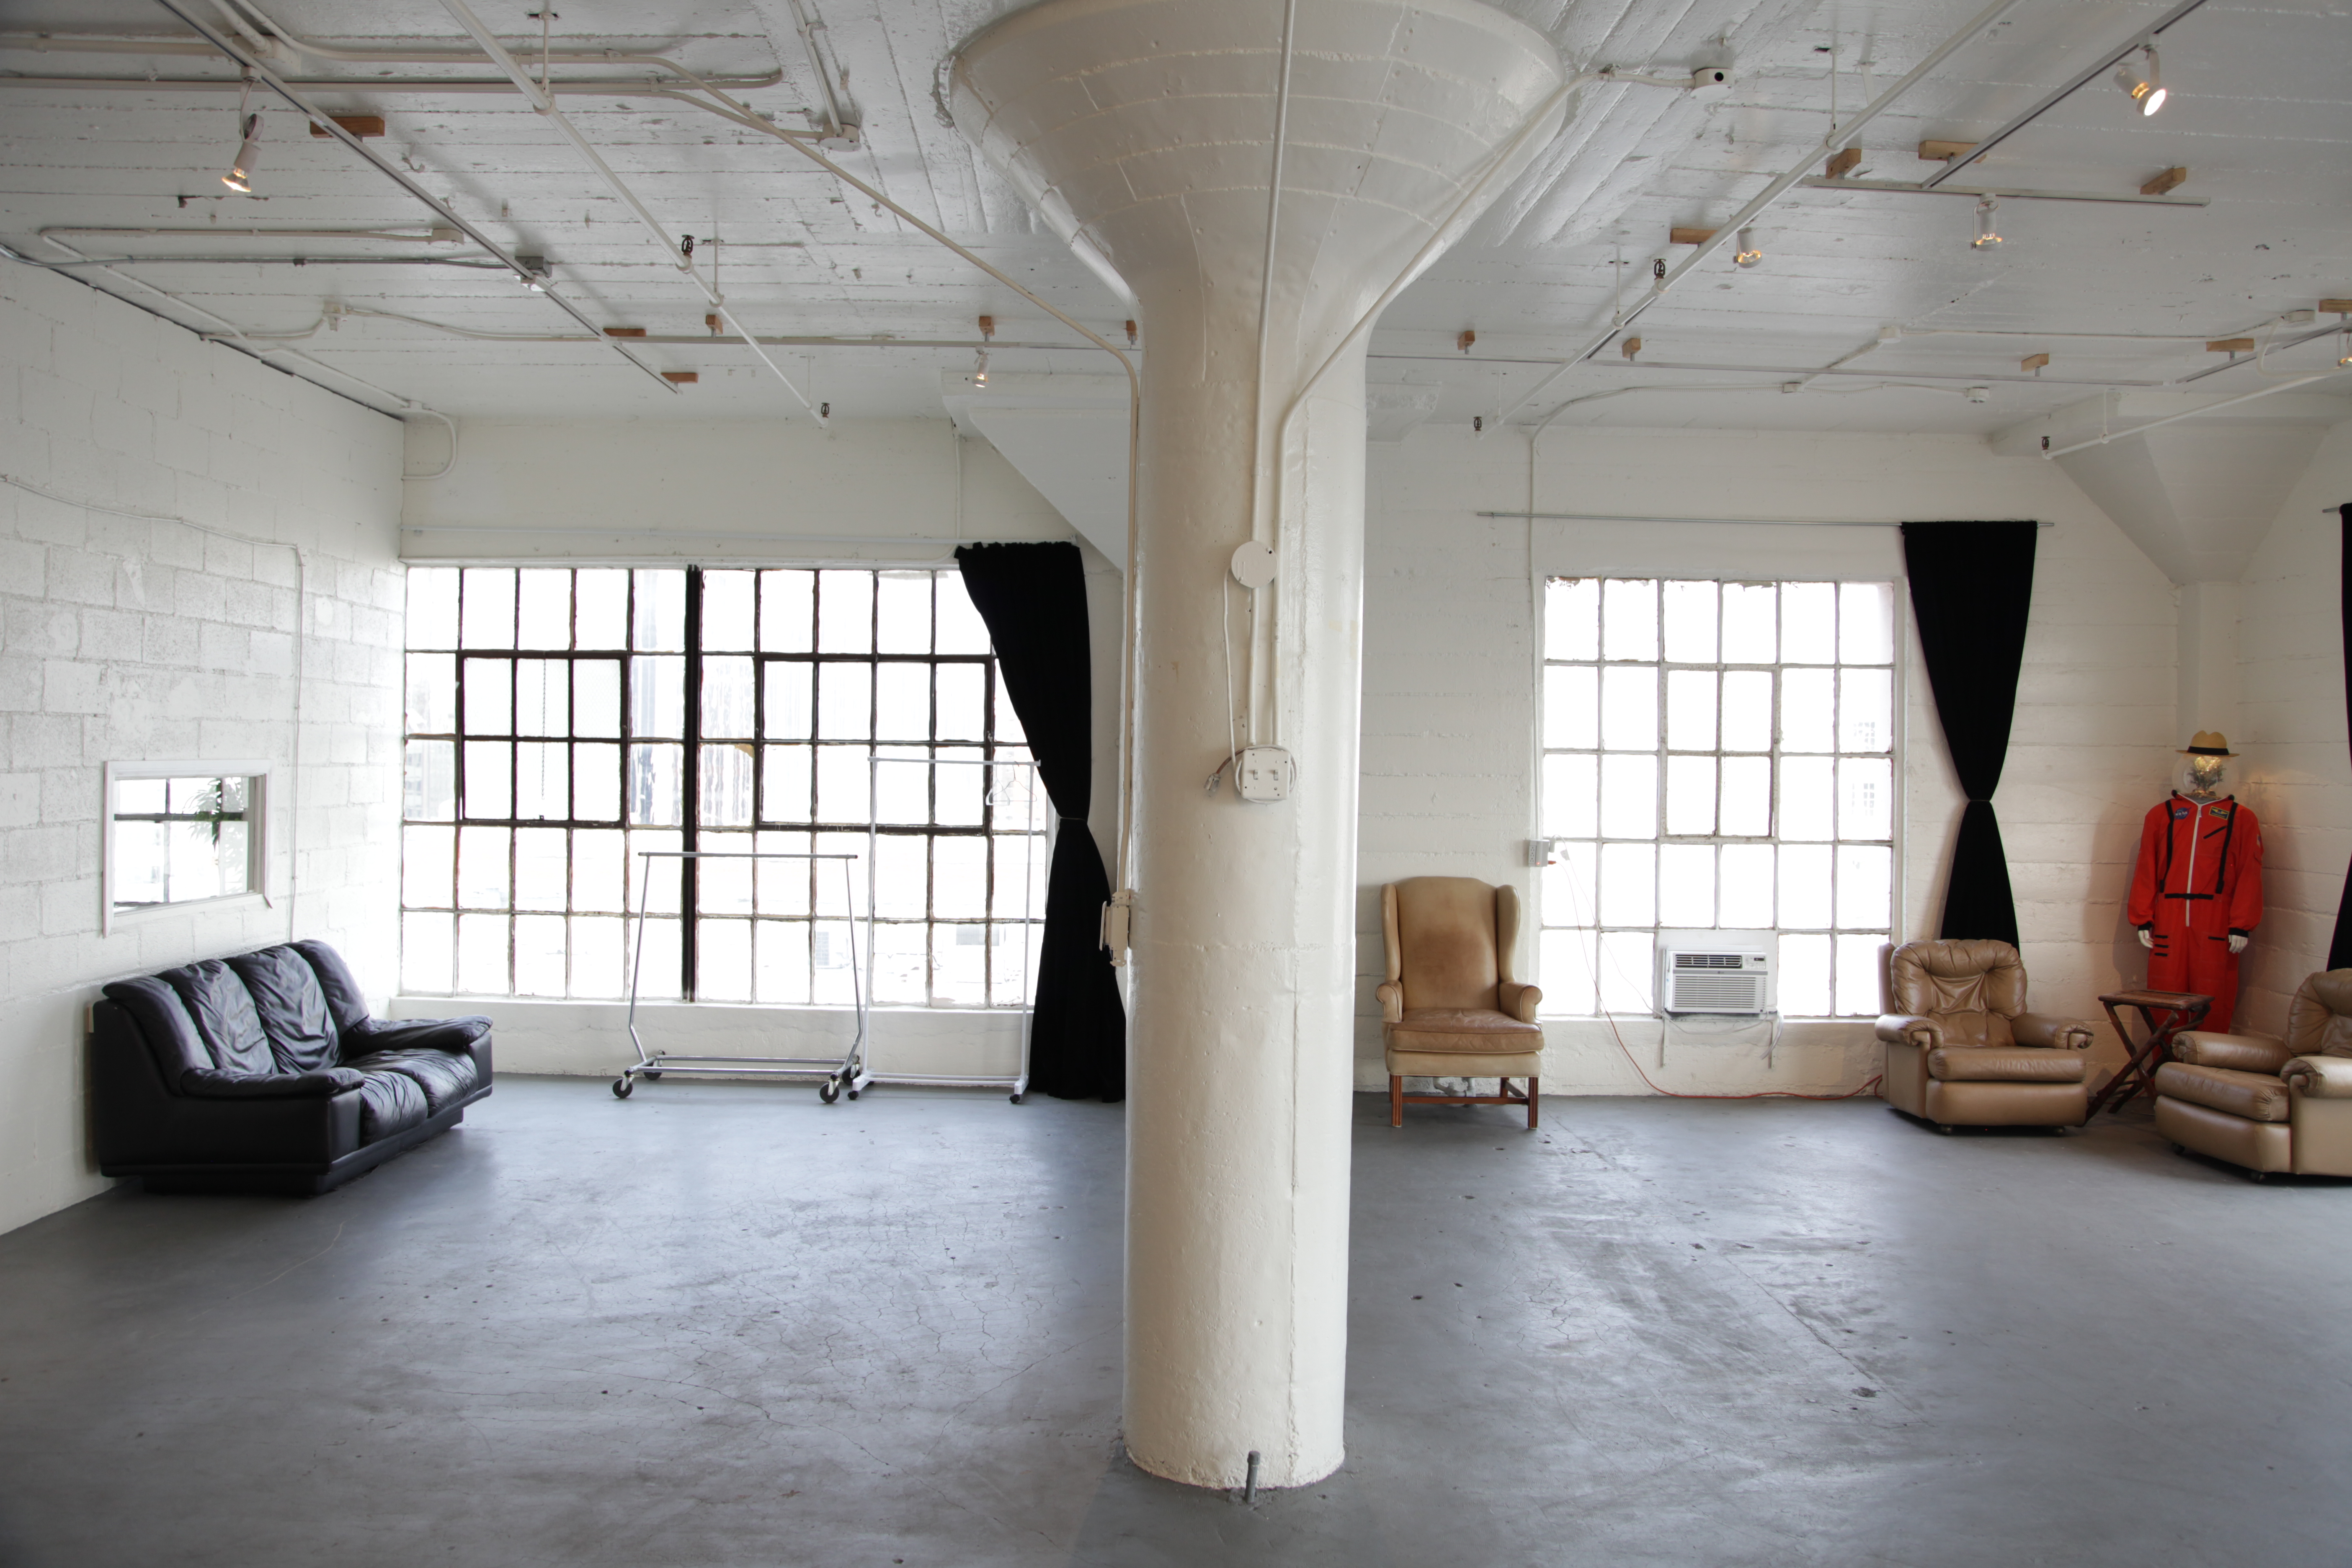 (Photo: Free the Nipple Yoga will be offered weekly beginning on Wednesday, January 20th at 8pm, at Astroetic Studios, a multipurpose loft space located in DTLA’s Fashion District. Guests will revel at the seven-story views offered through Astroetic Studios’ floor-to-ceiling windows.